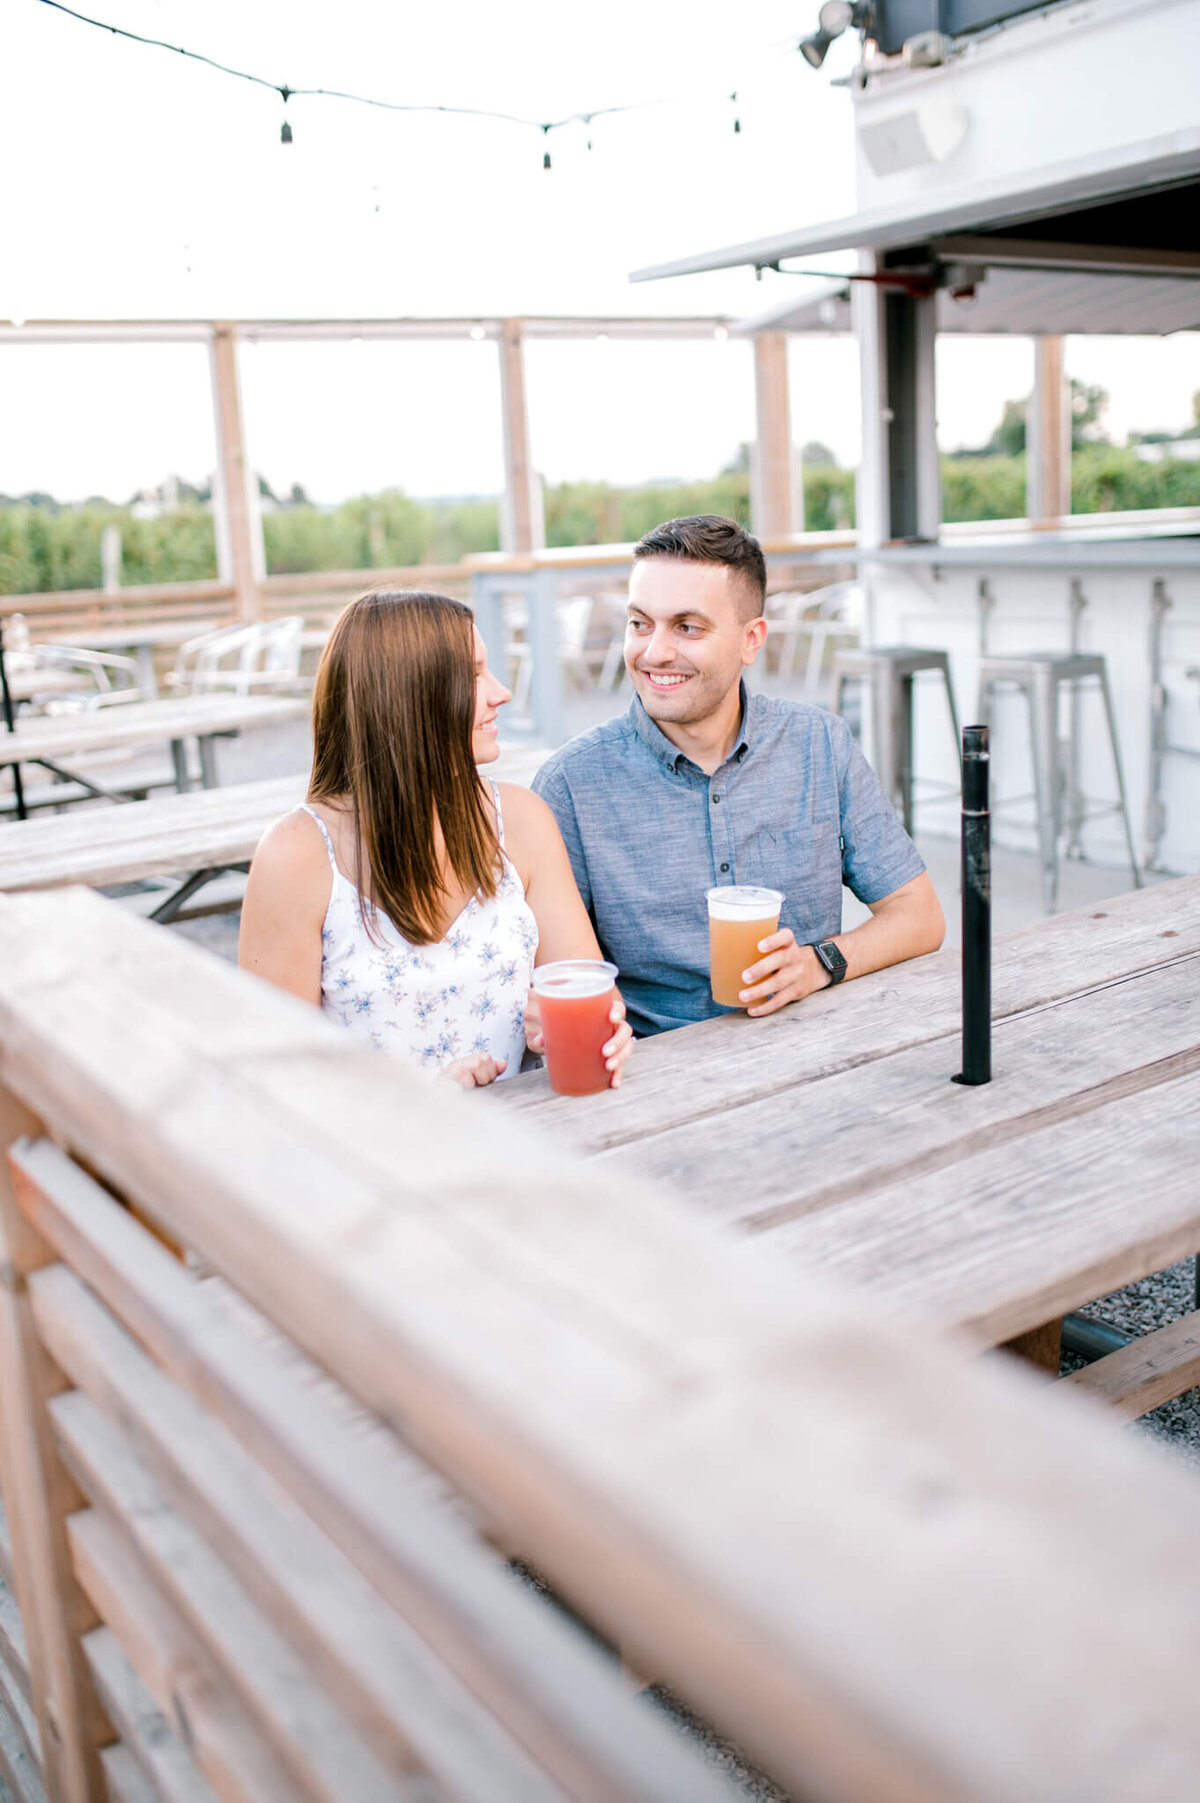 Niagara Wedding Photography captures engaged couple sitting and having a beer together